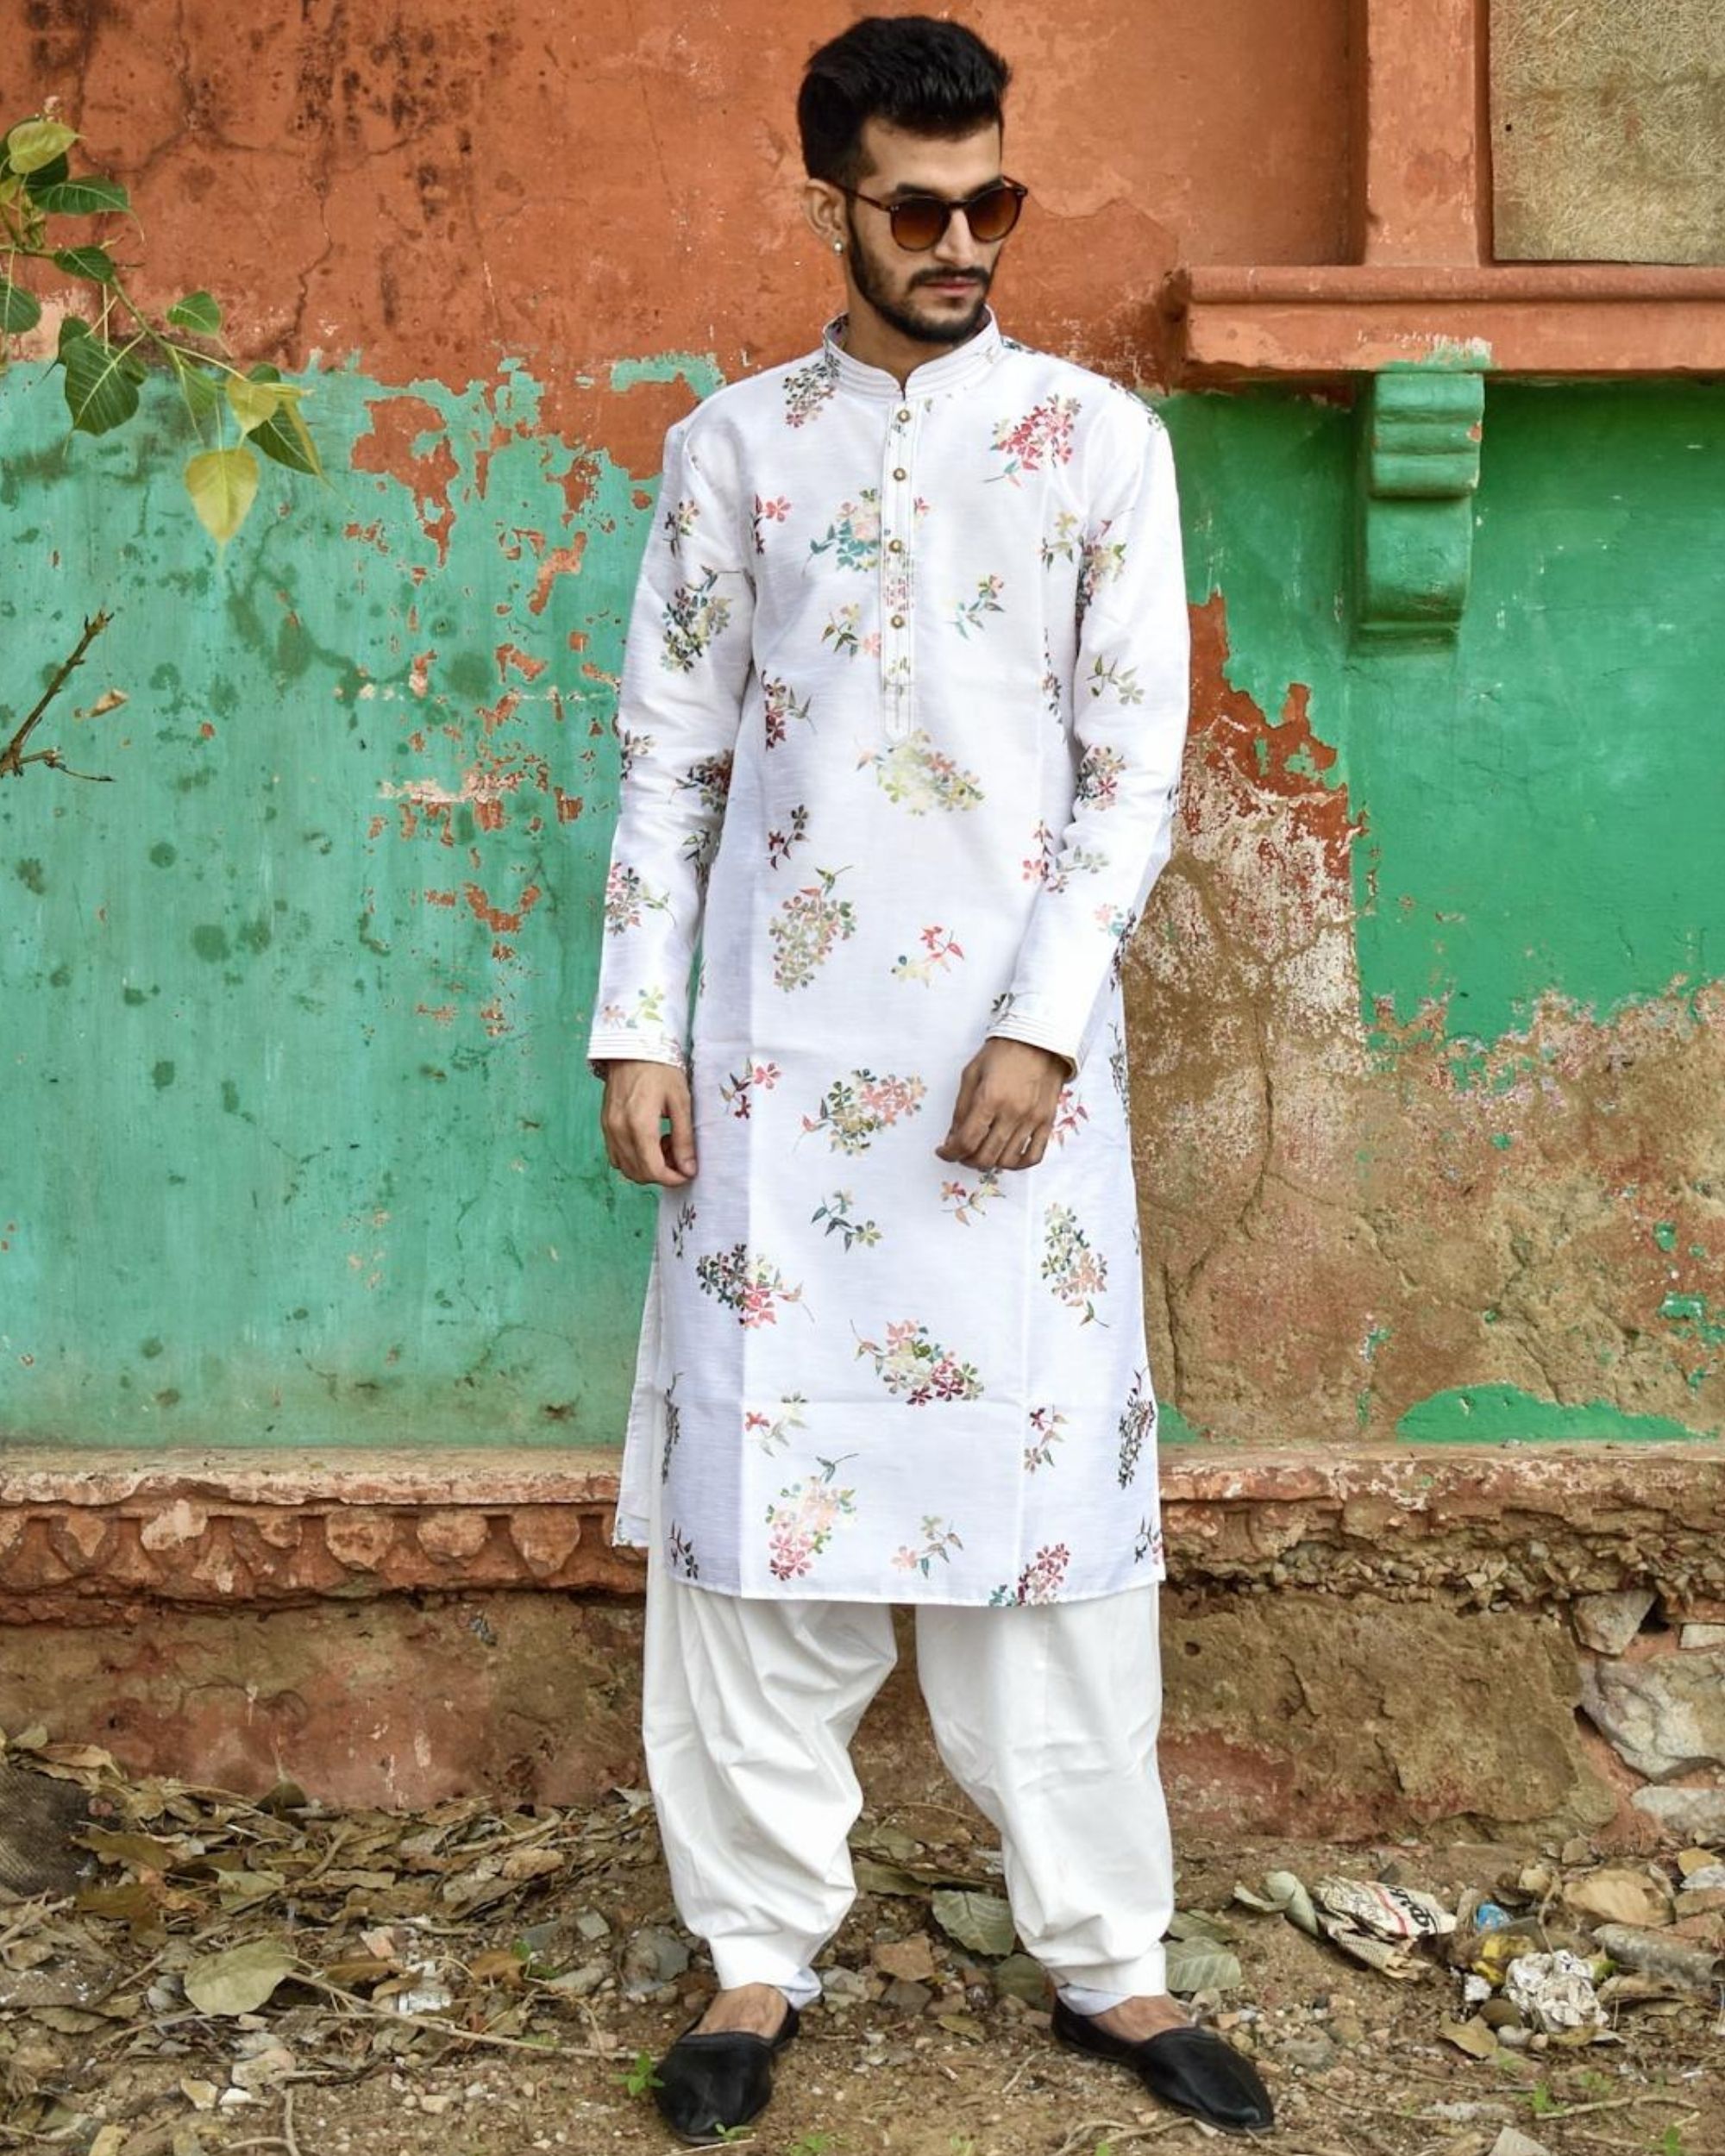 The Best Holi Outfit For Men to Sport For Upcoming Holi